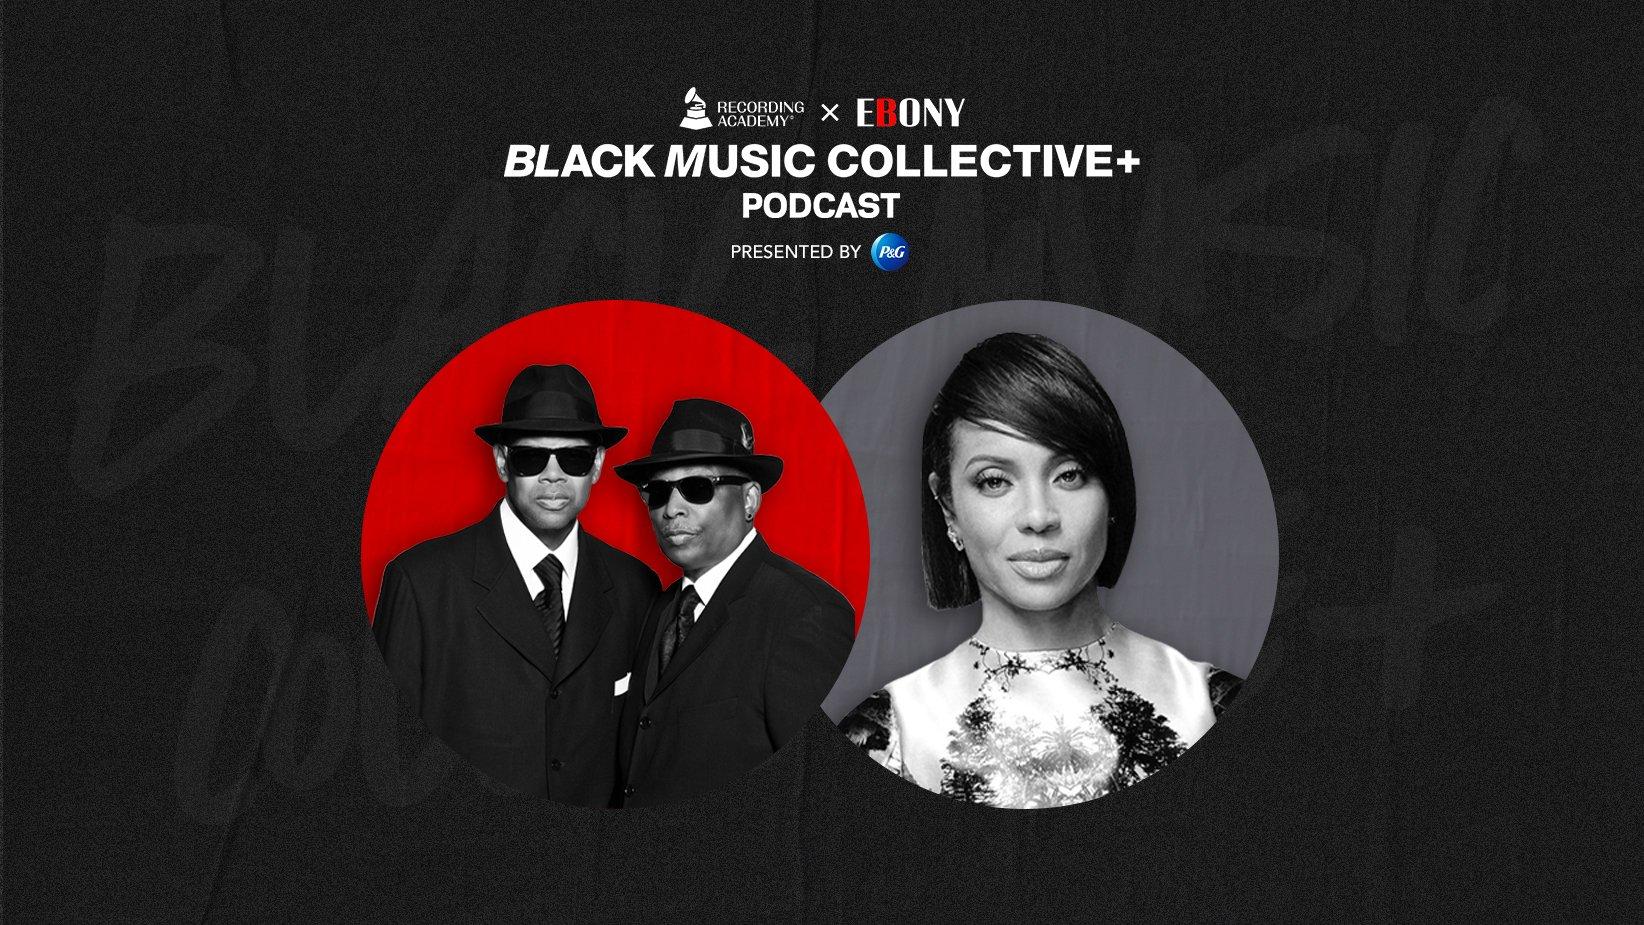 Artwork for Recording Academy x EBONY: Black Music Collective Podcast episode with Jimmy Jam & Terry Lewis